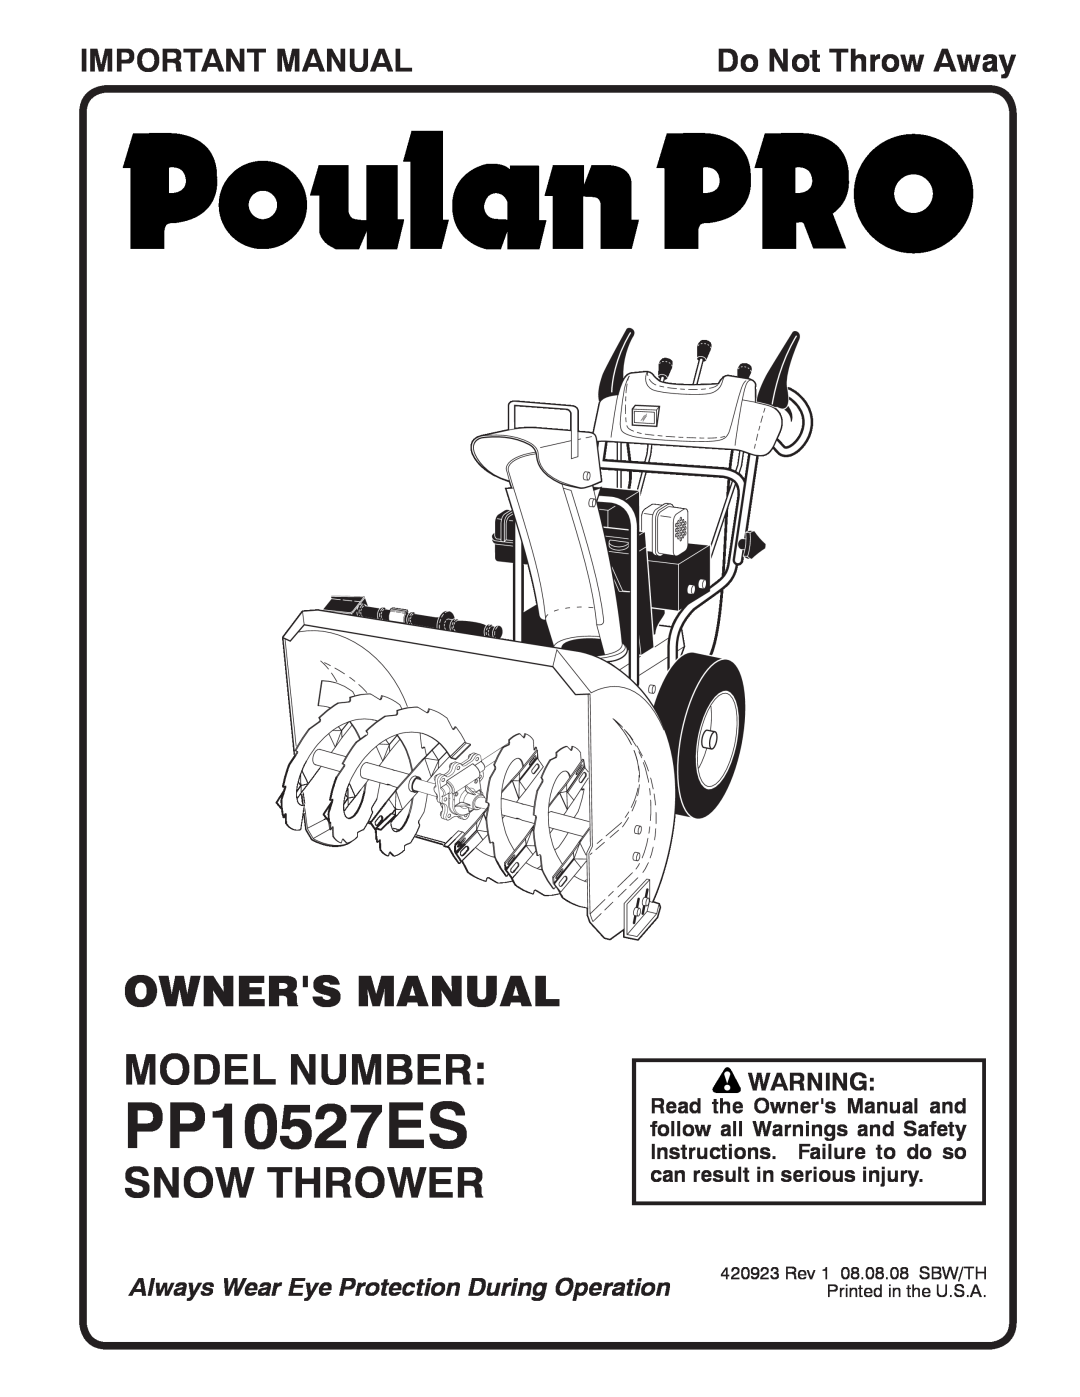 Poulan 420923, 96192002000 owner manual Snow Thrower, Important Manual, PP10527ES, Do Not Throw Away 